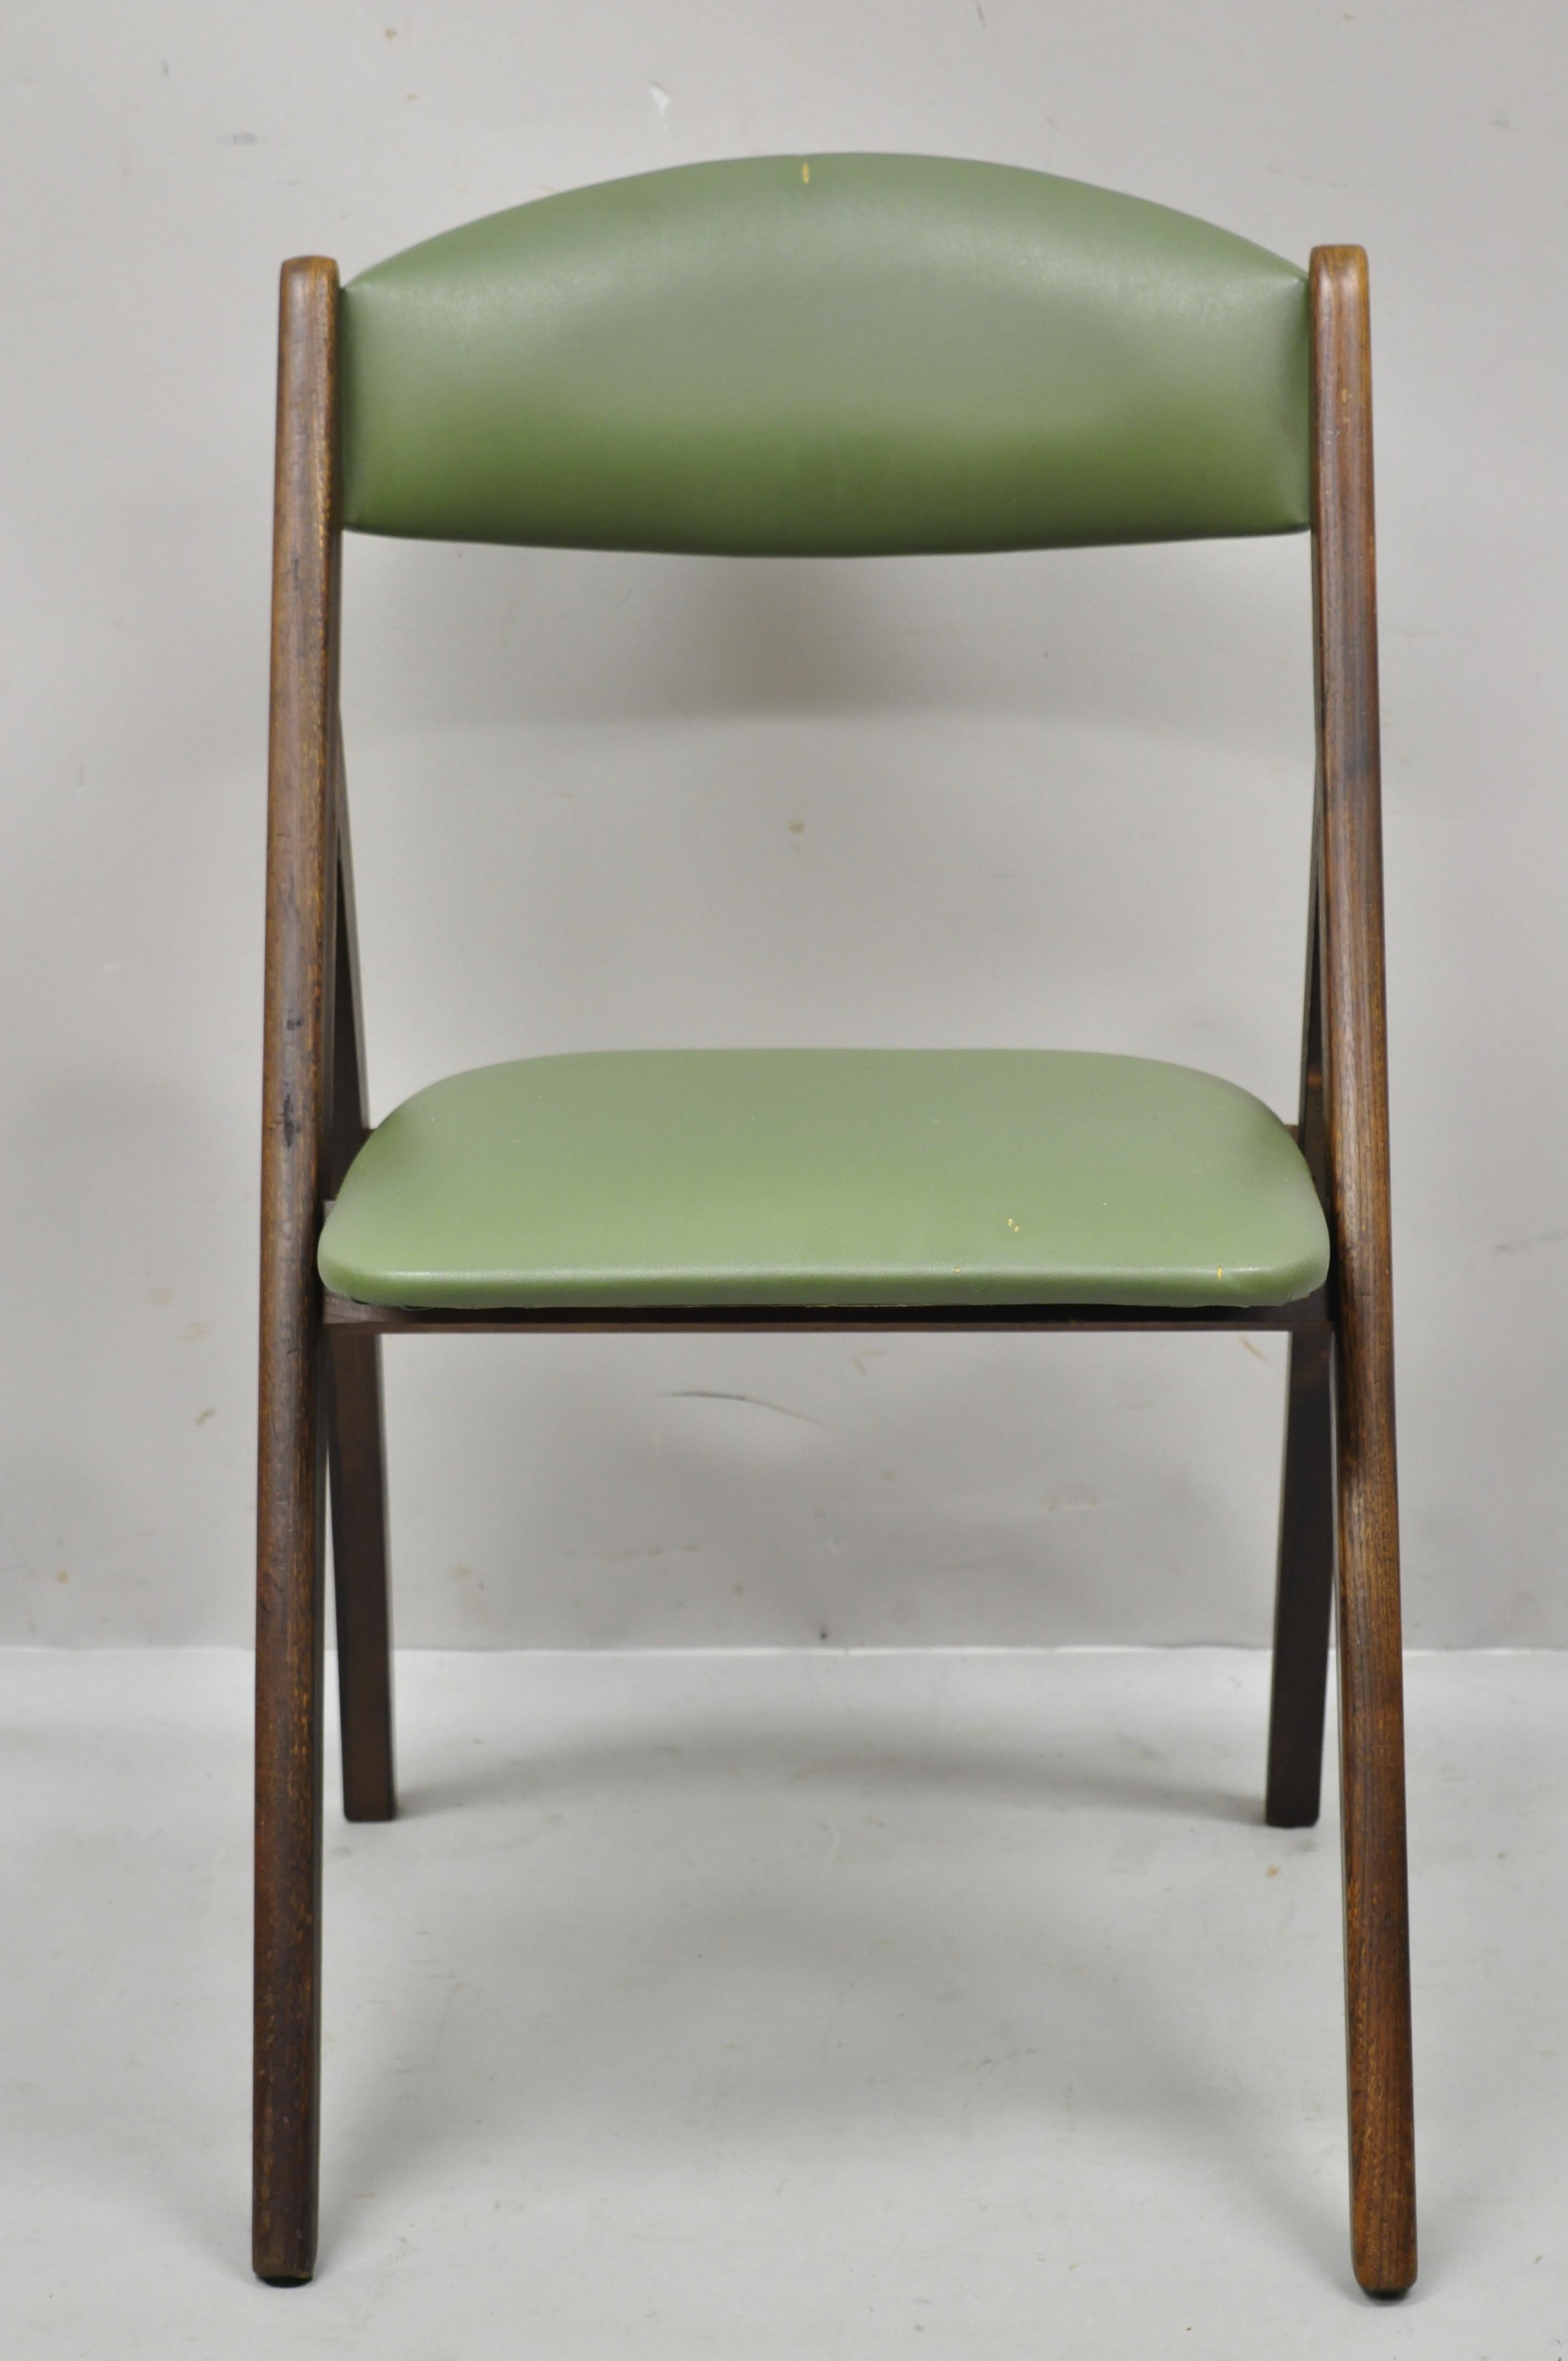 Vintage Mid-Century Modern Stakmore solid wood folding dining game table chair. Item features green Naugahyde vinyl upholstery, solid wood folding frames, beautiful wood grain, original label, clean modernist lines, quality American craftsmanship,